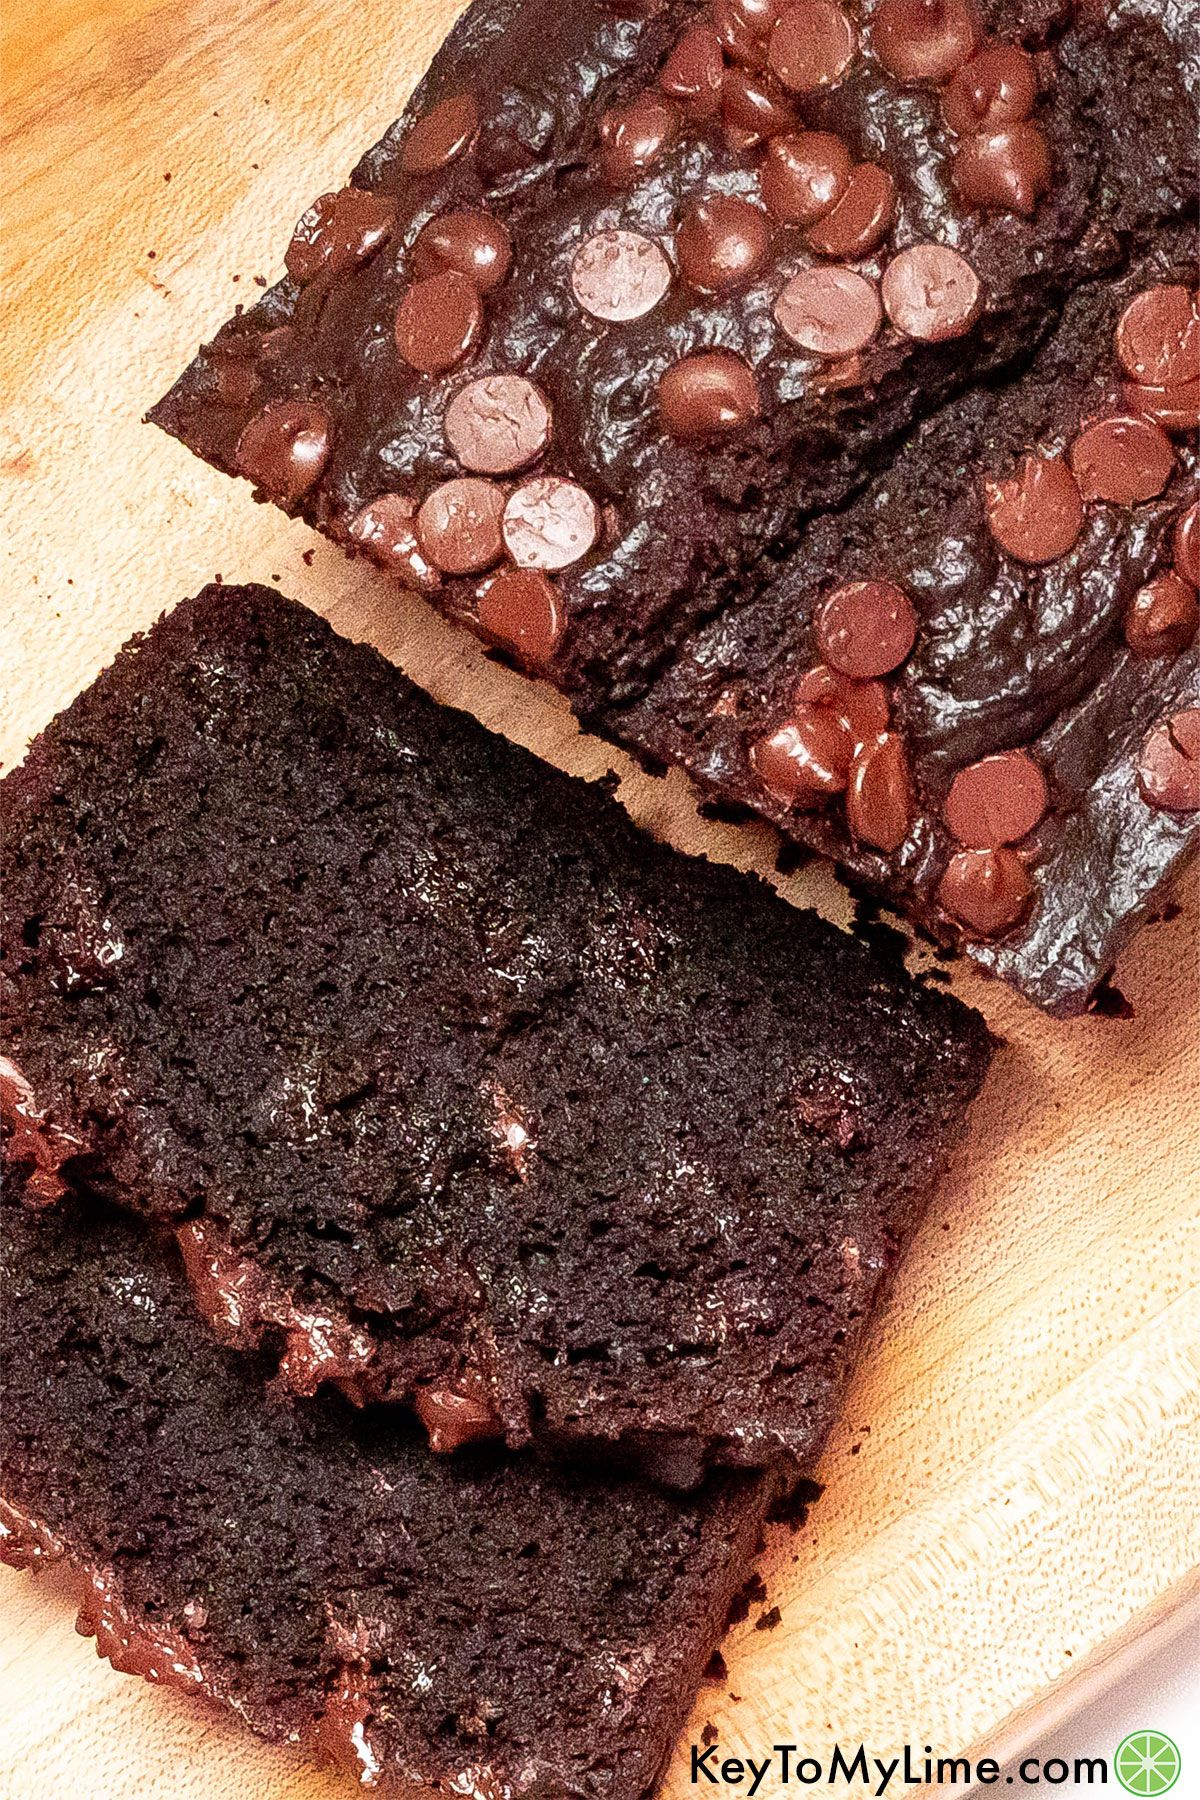 A zoomed in image of slices of chocolate bread showing the moist interior texture with melted chocolate chips.